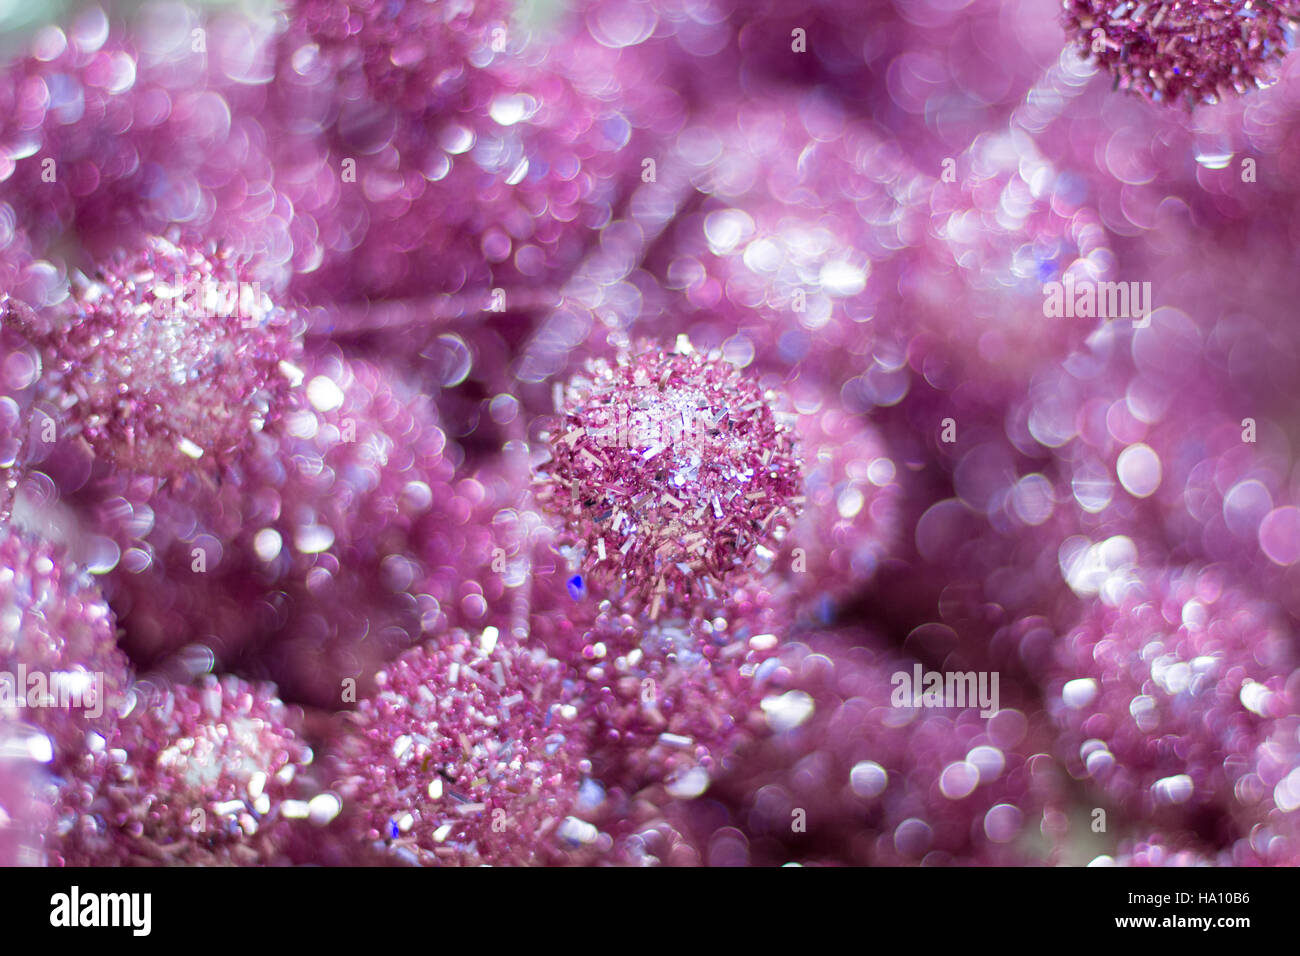 Bright shiny pink and lilac drops background for celebration greeting cards Stock Photo